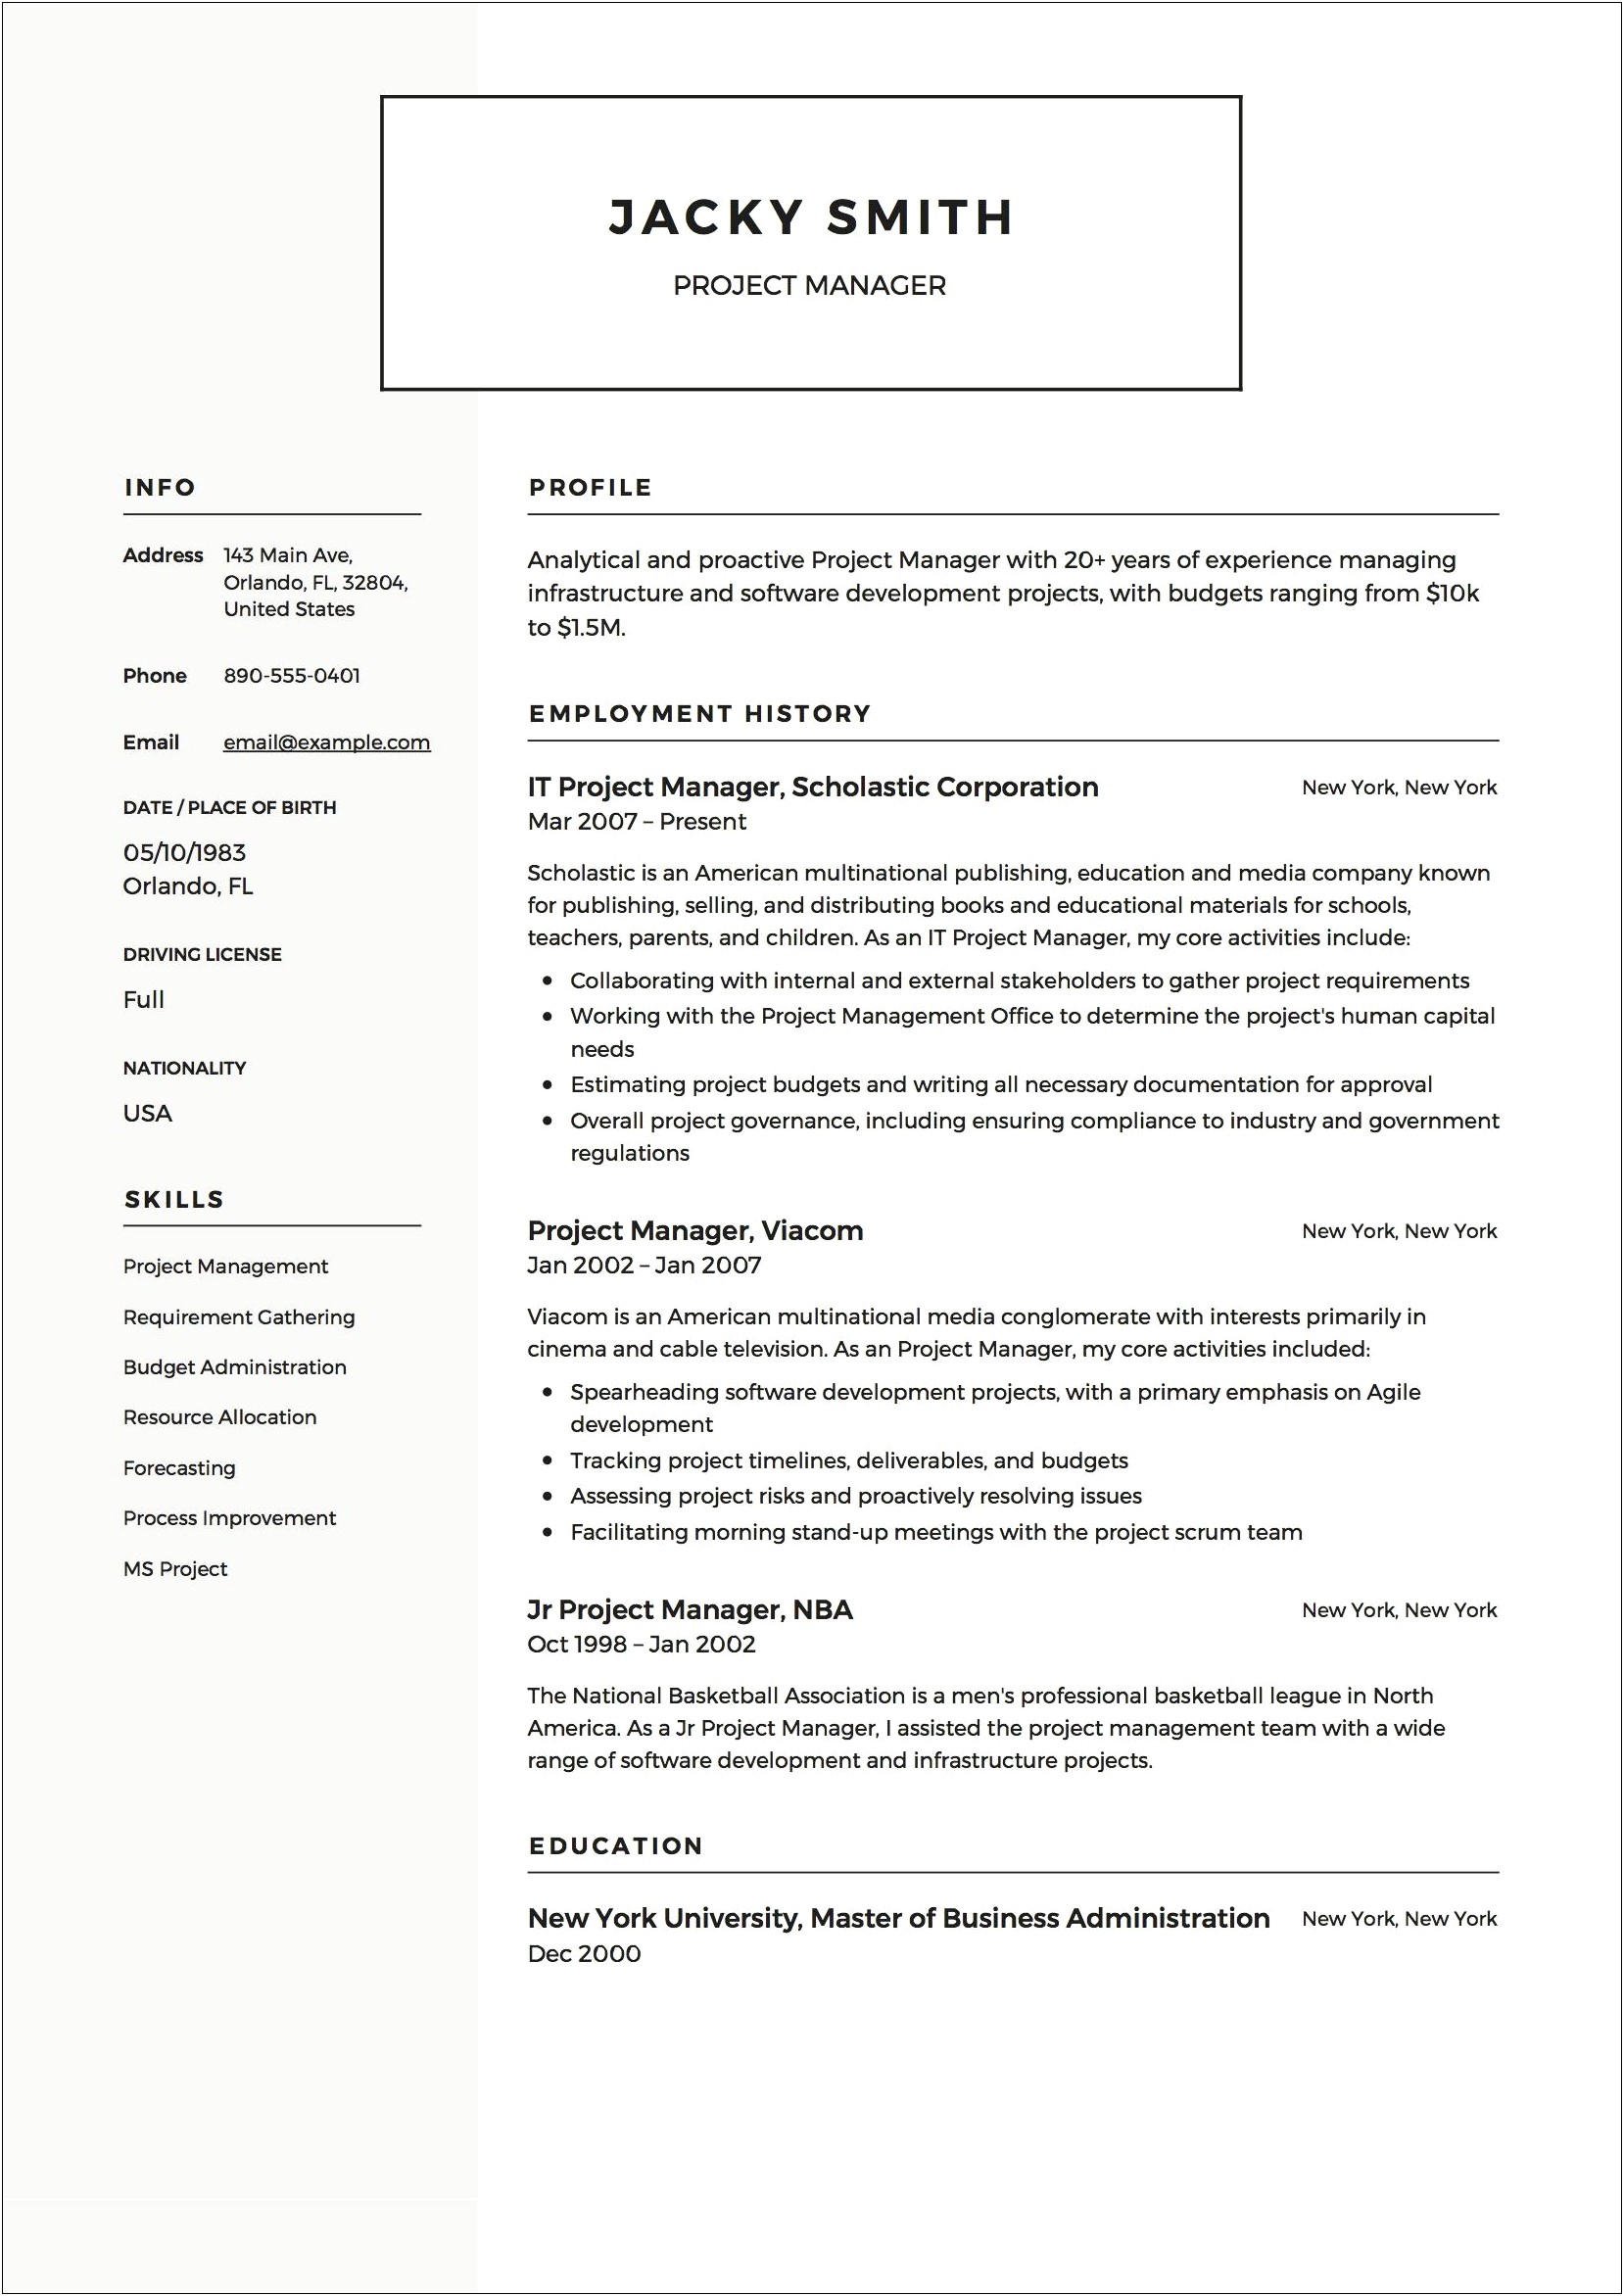 Resume Bullet Points For Project Manager